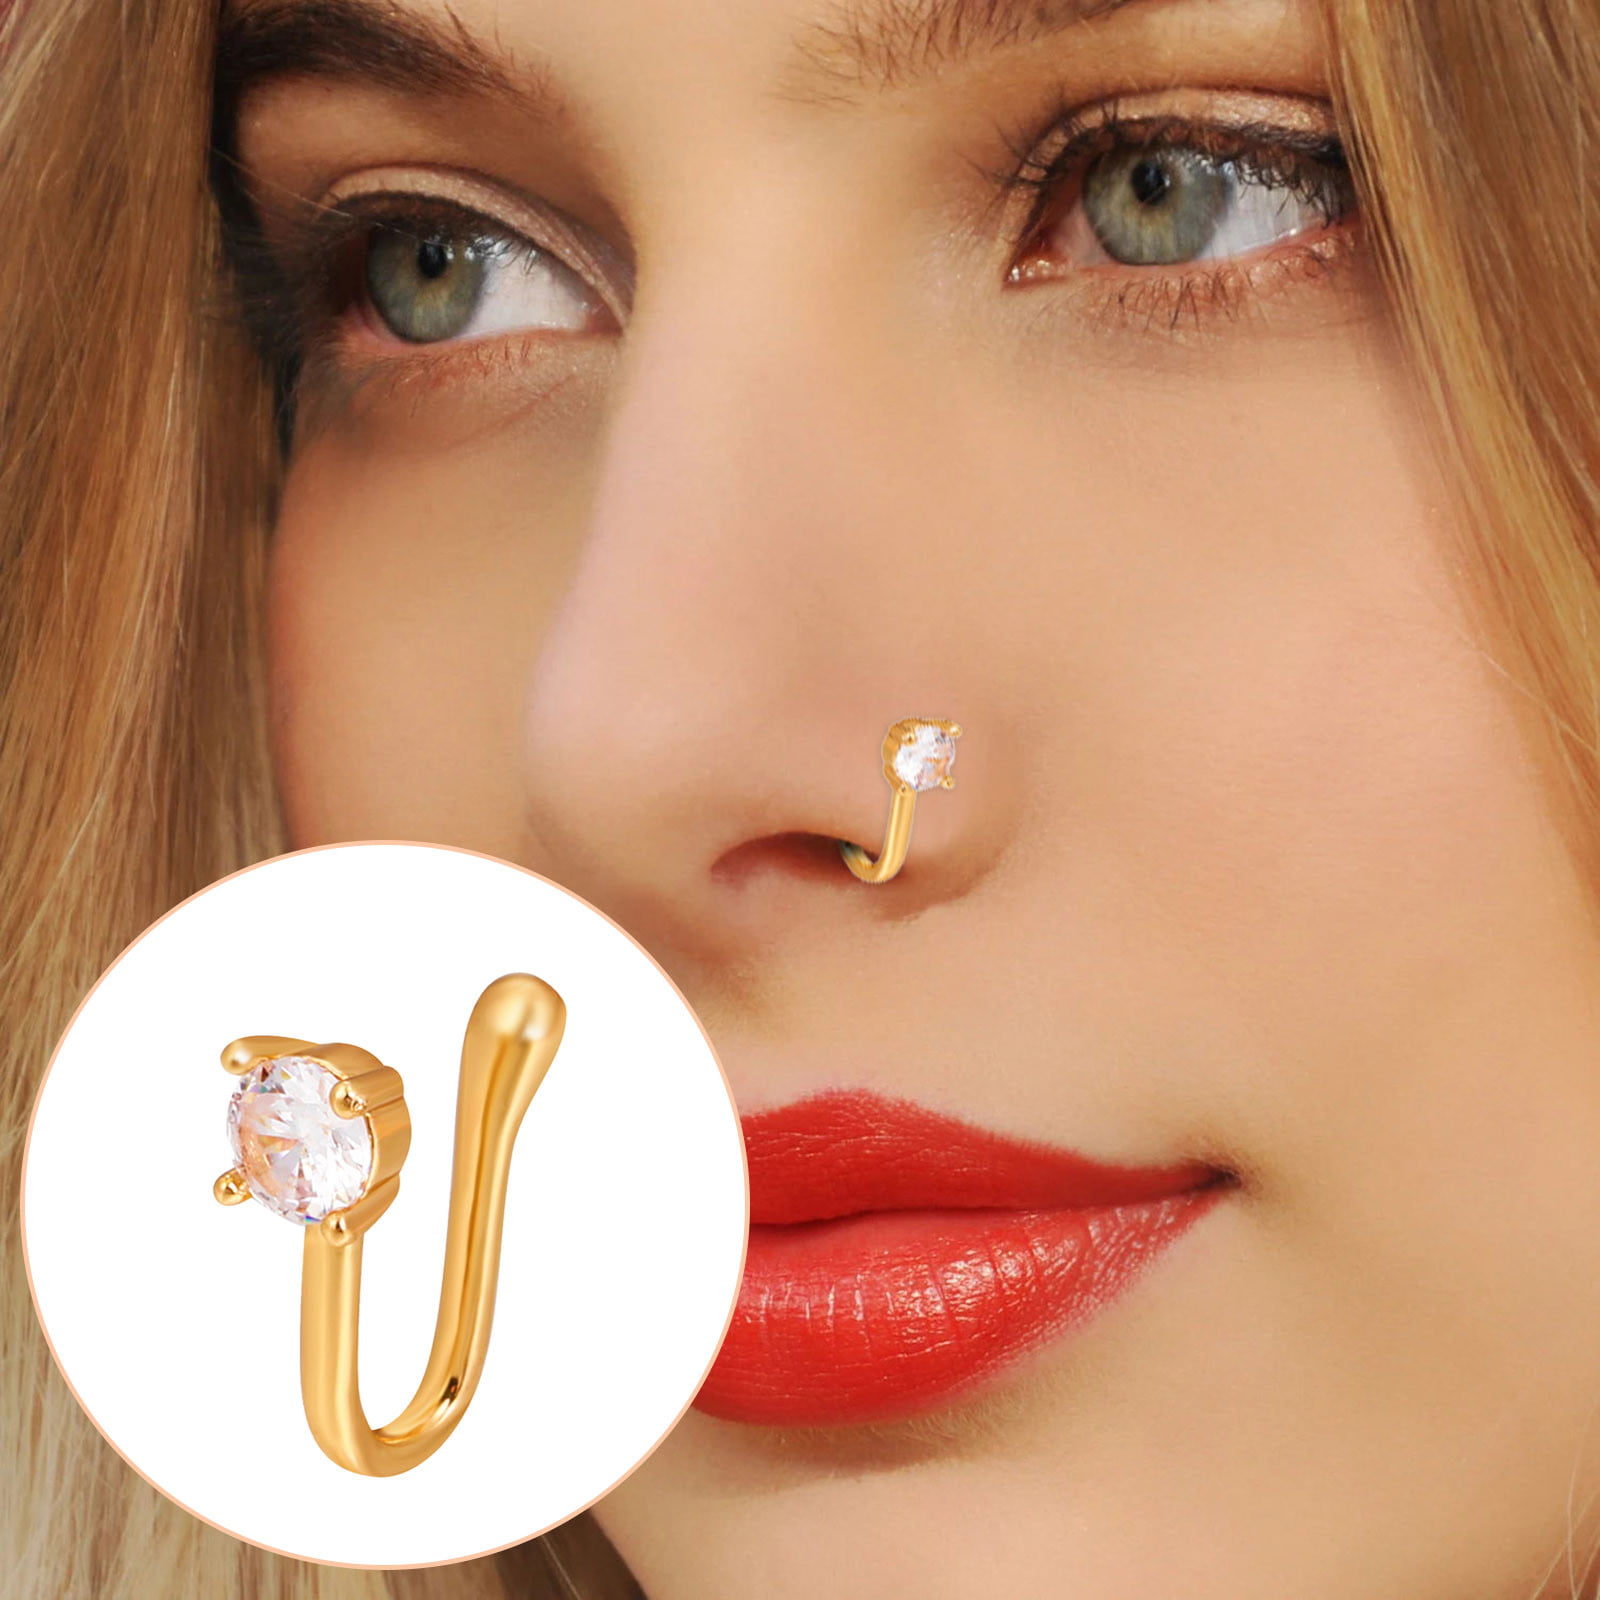 Nose Piercing Left Side Meaning: The Ultimate Guide